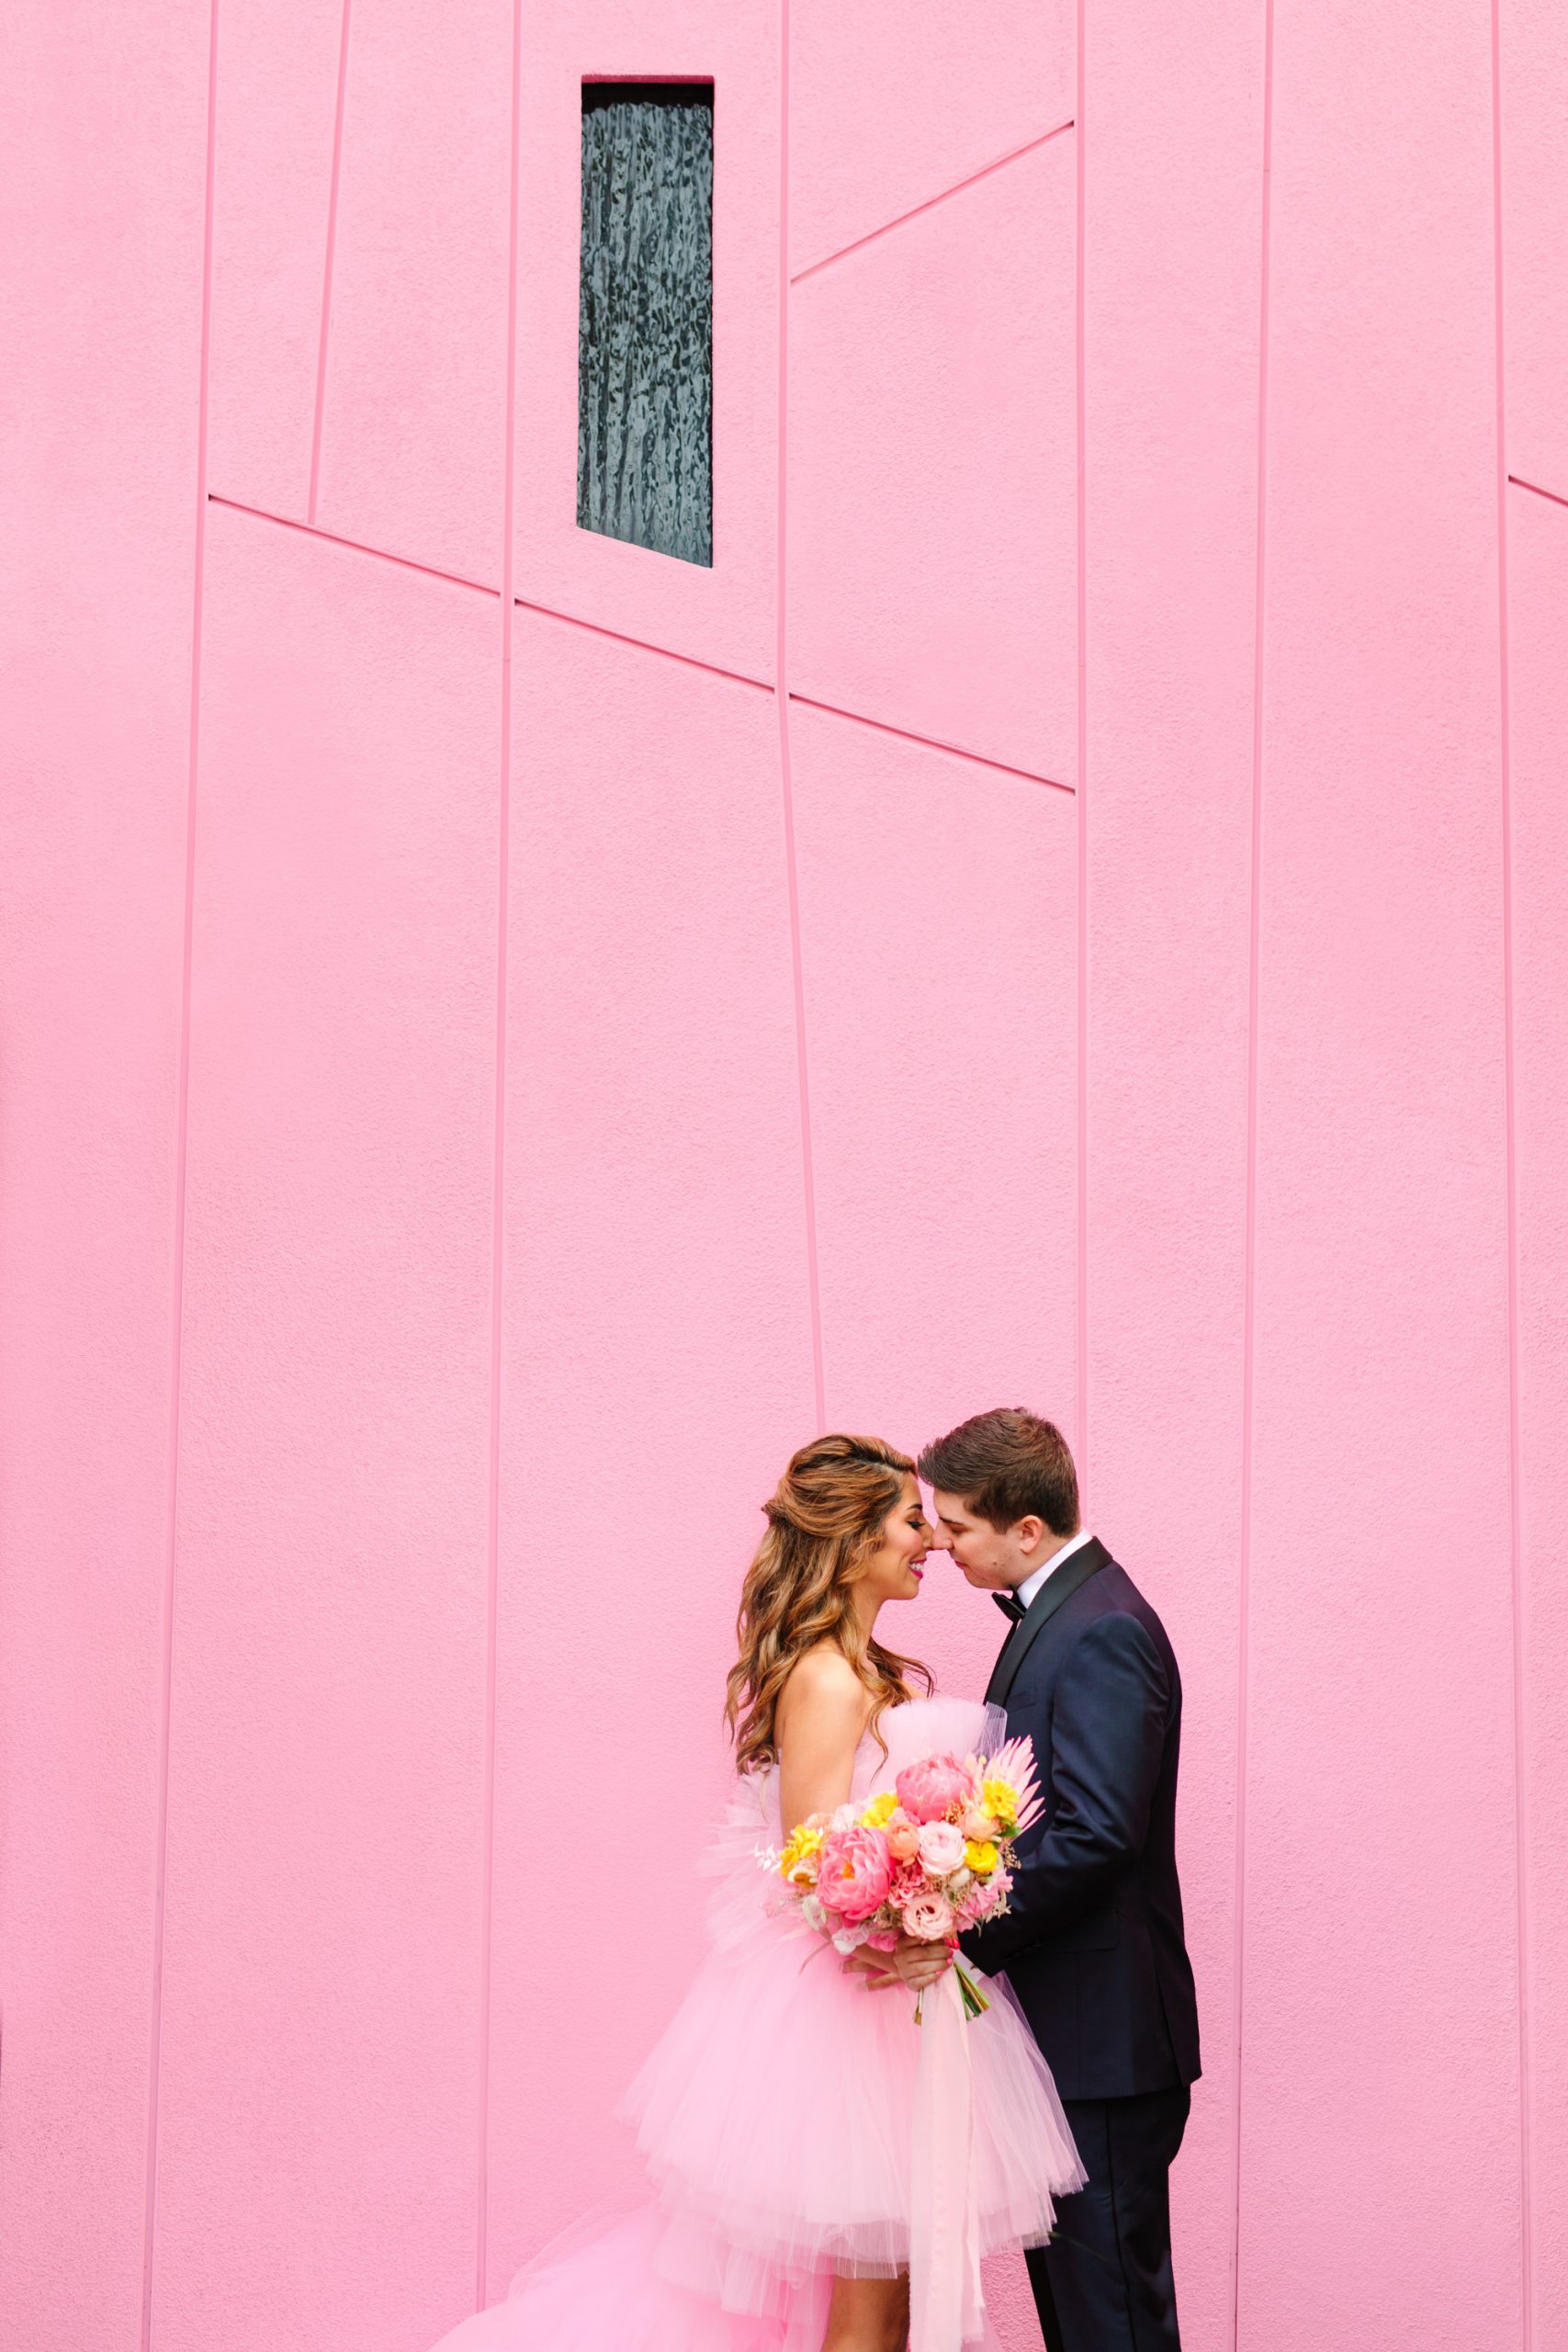 Pink wedding dress Palm Springs elopement featured on Green Wedding Shoes | Colorful mid-century modern wedding with Saguaro Hotel backdrop | Vibrant and elevated wedding photos for fun-loving couples in Southern California #palmspringswedding #palmspringselopement #pinkwedding #greenweddingshoes Source: Mary Costa Photography | Los Angeles